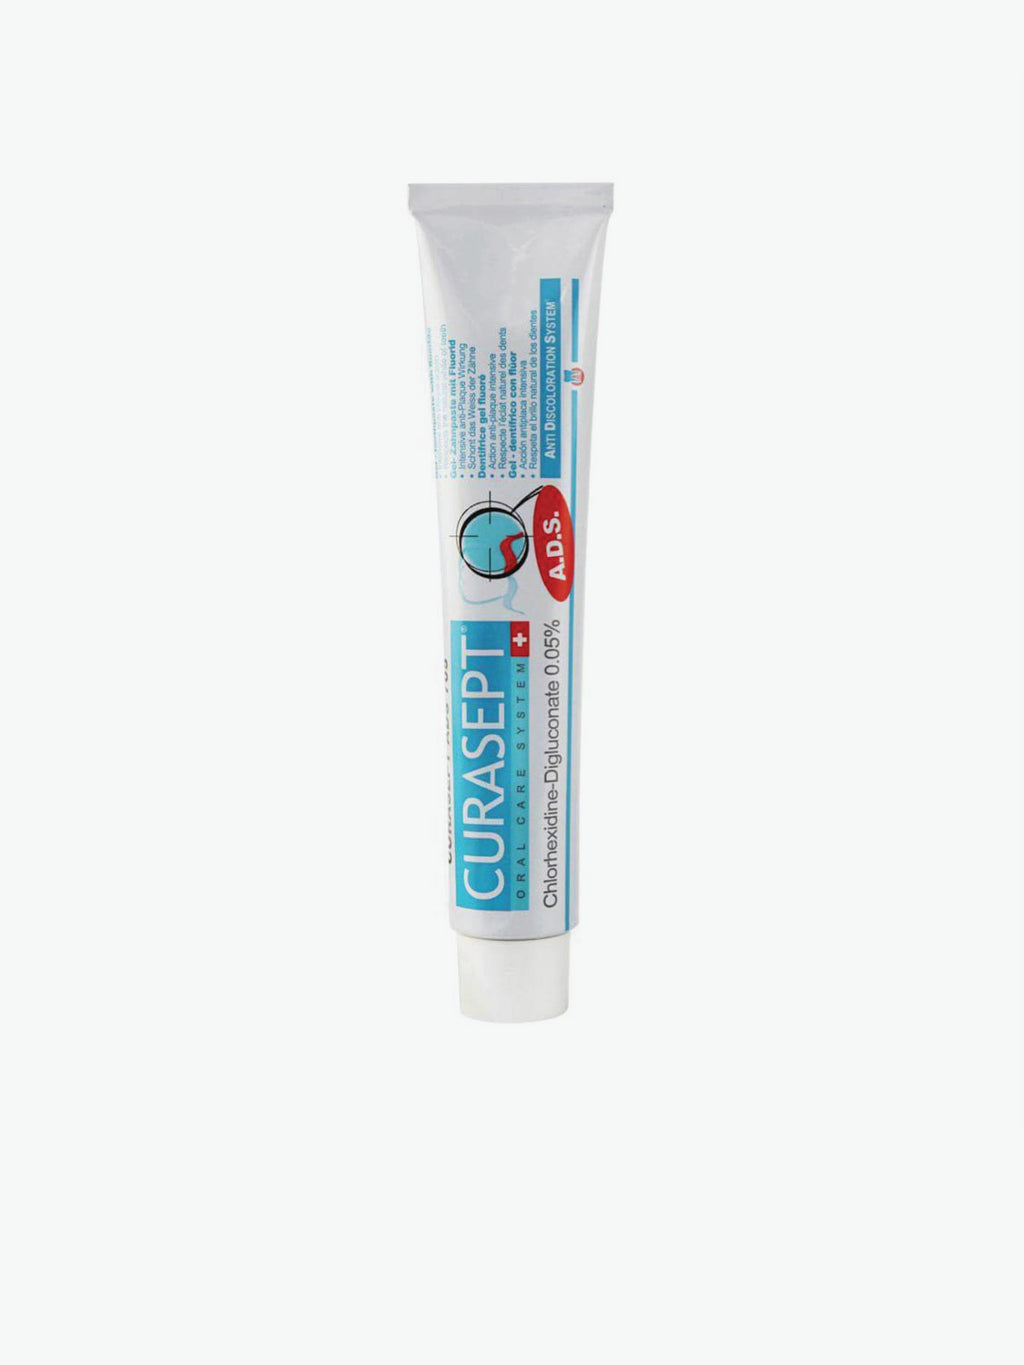 Curasept ADS 705 Toothpaste 0.05% | A